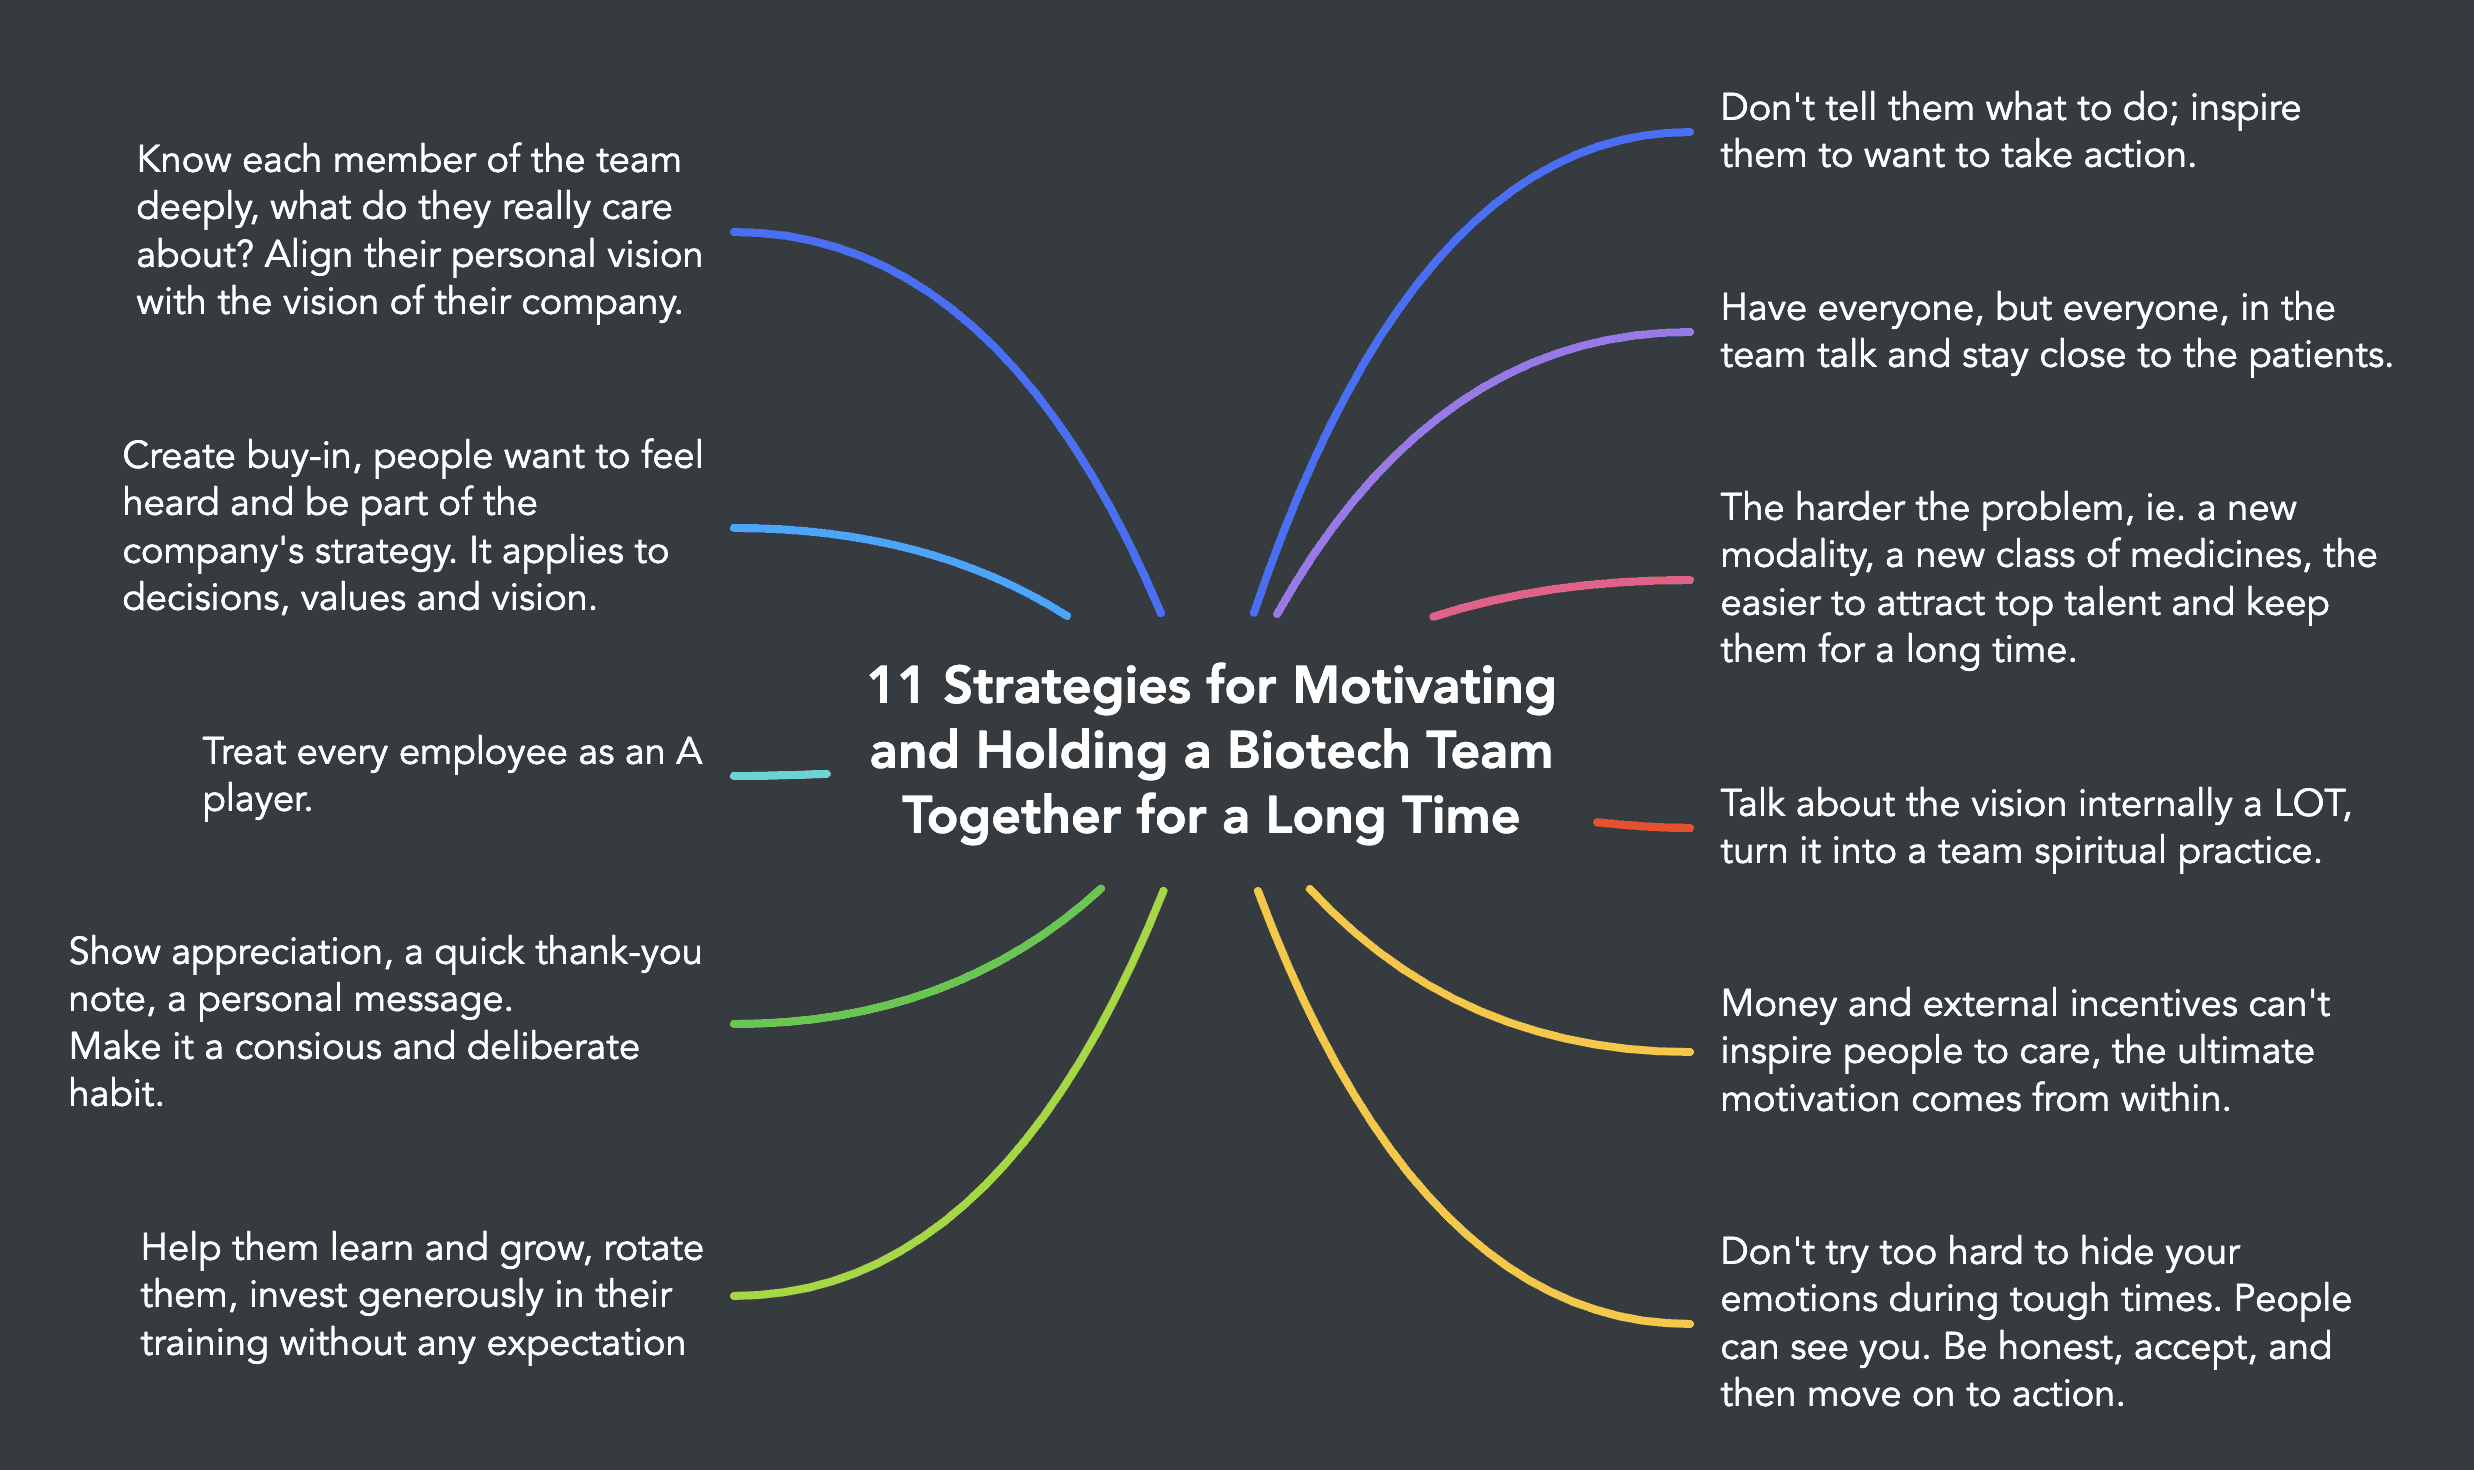 11 Strategies for Motivating and Holding a Biotech Team Together for a Long Time